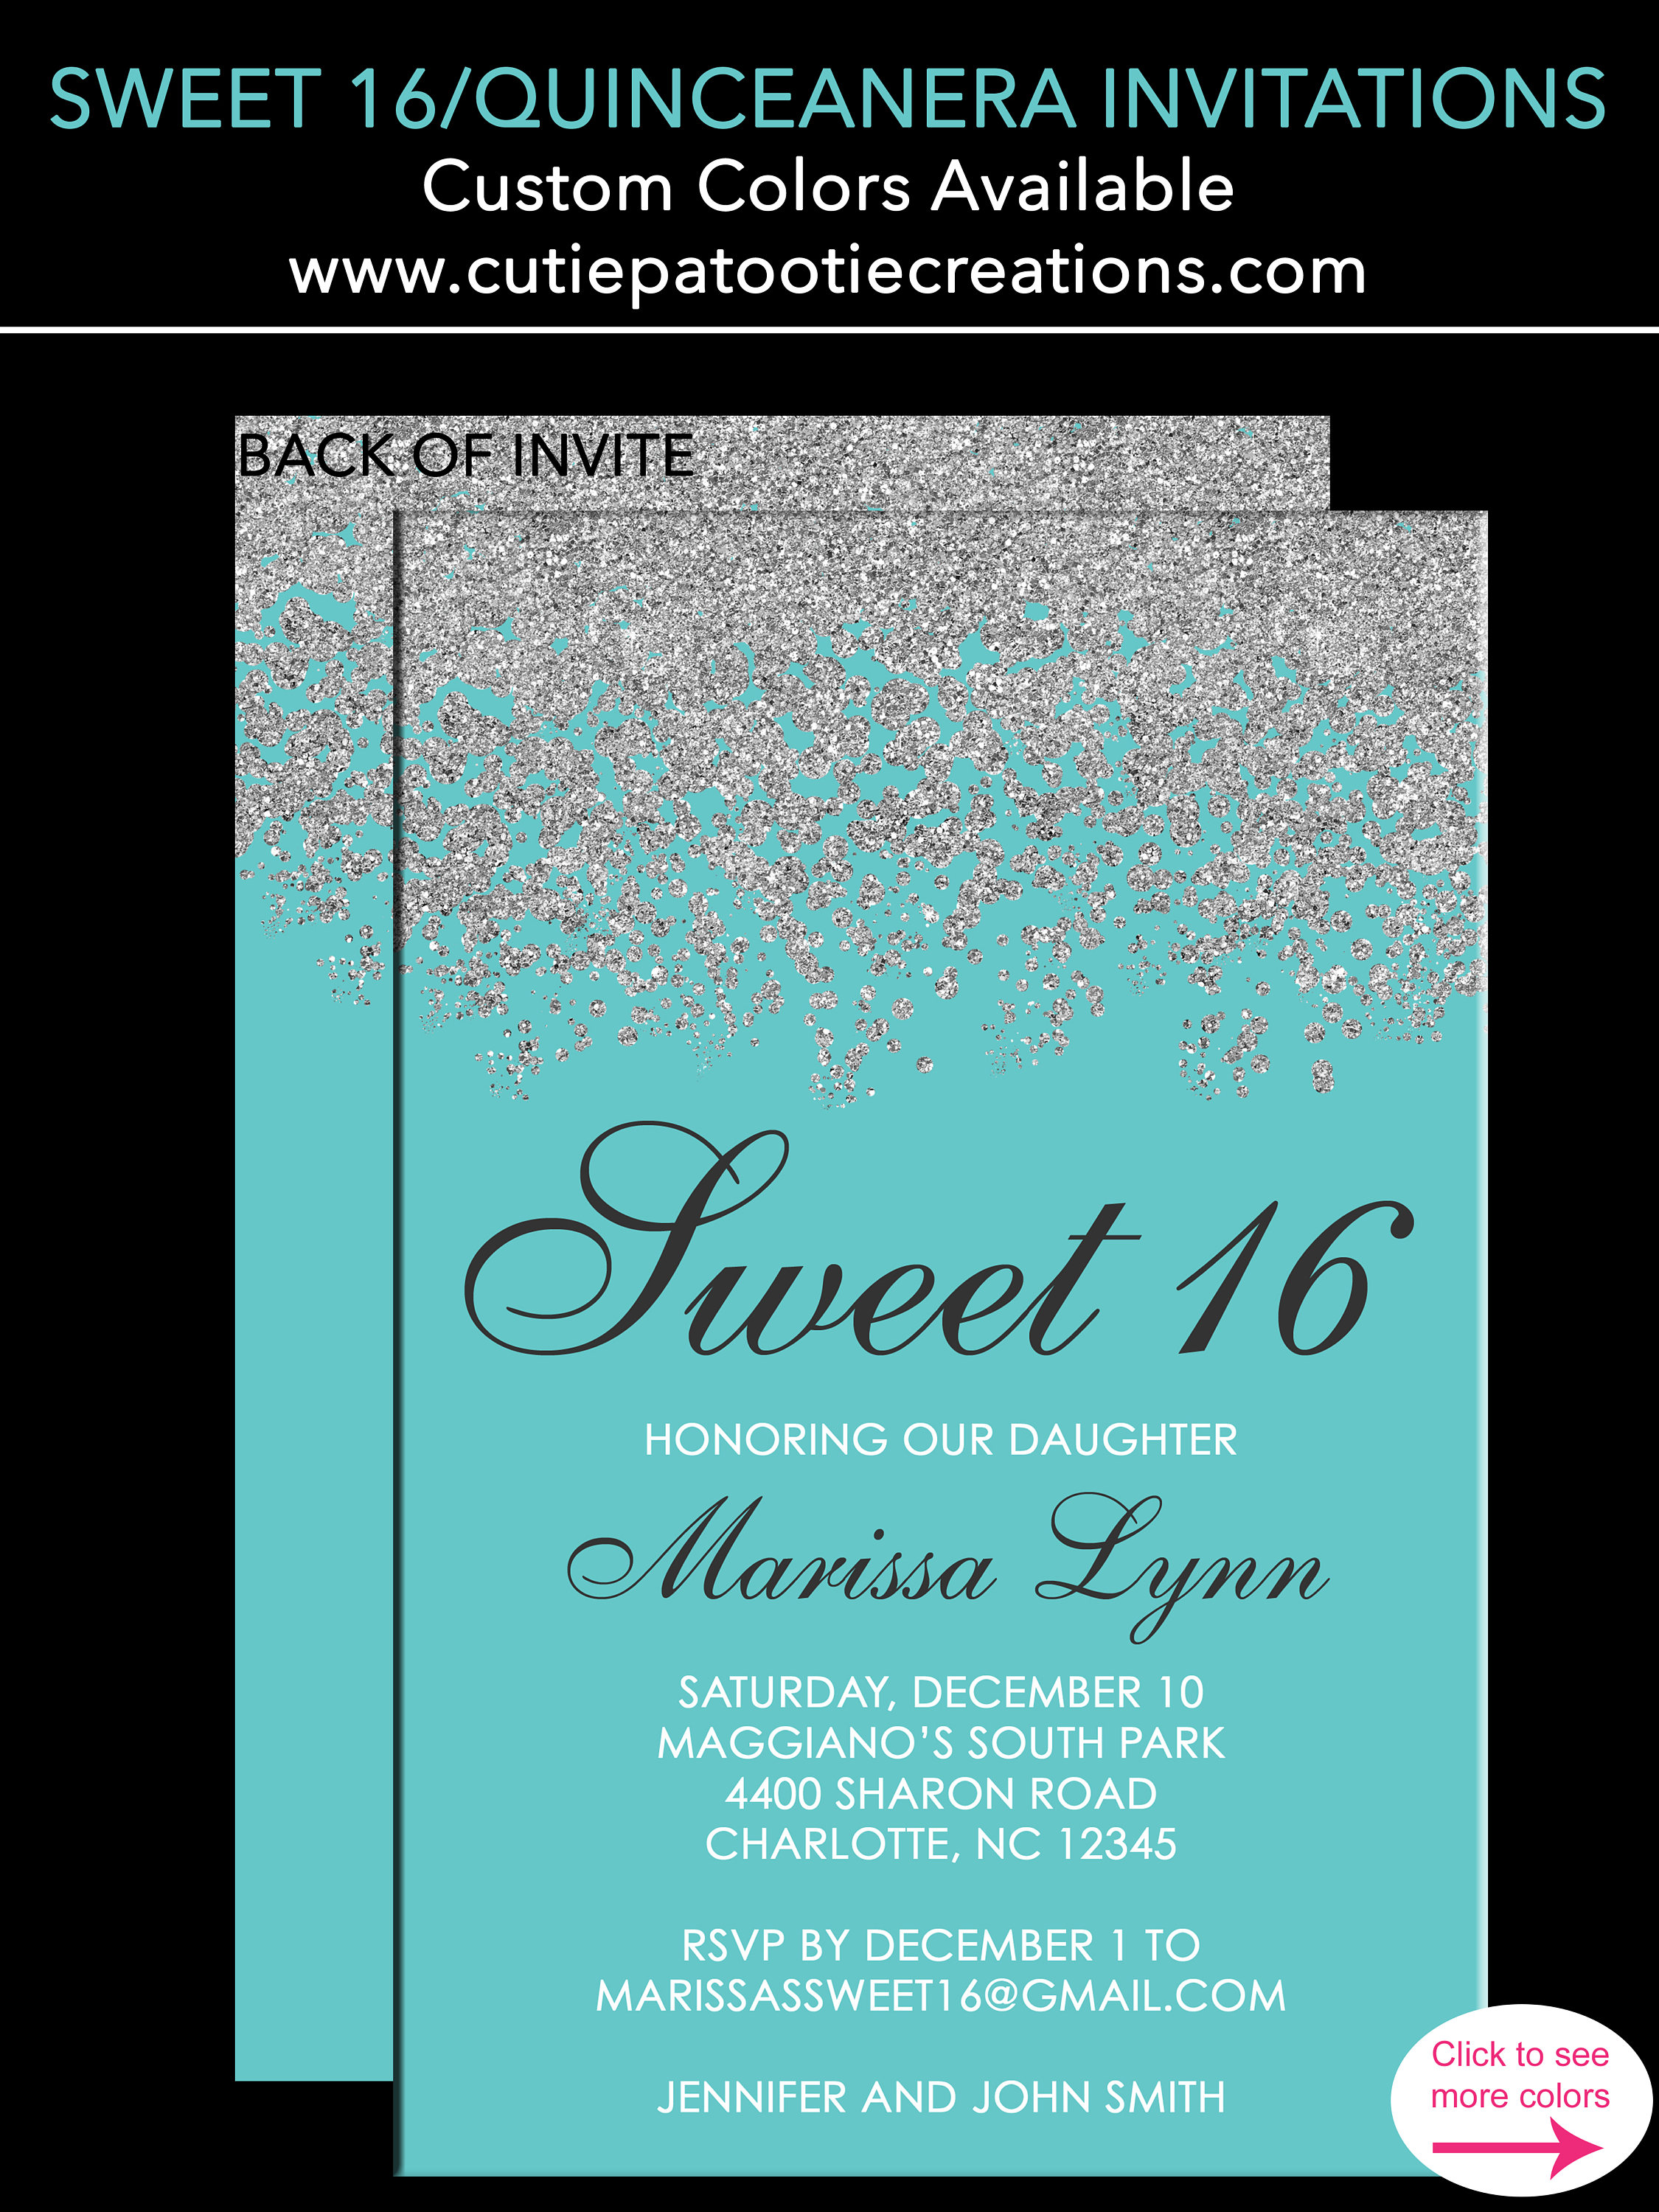 Your choice of Quantity Info and Envelope Color Black Lace Sweet 16 Invitations with Envelopes Black and Gold 16th Birthday Invitations for Girls Personalized Sweet 16 Invites 